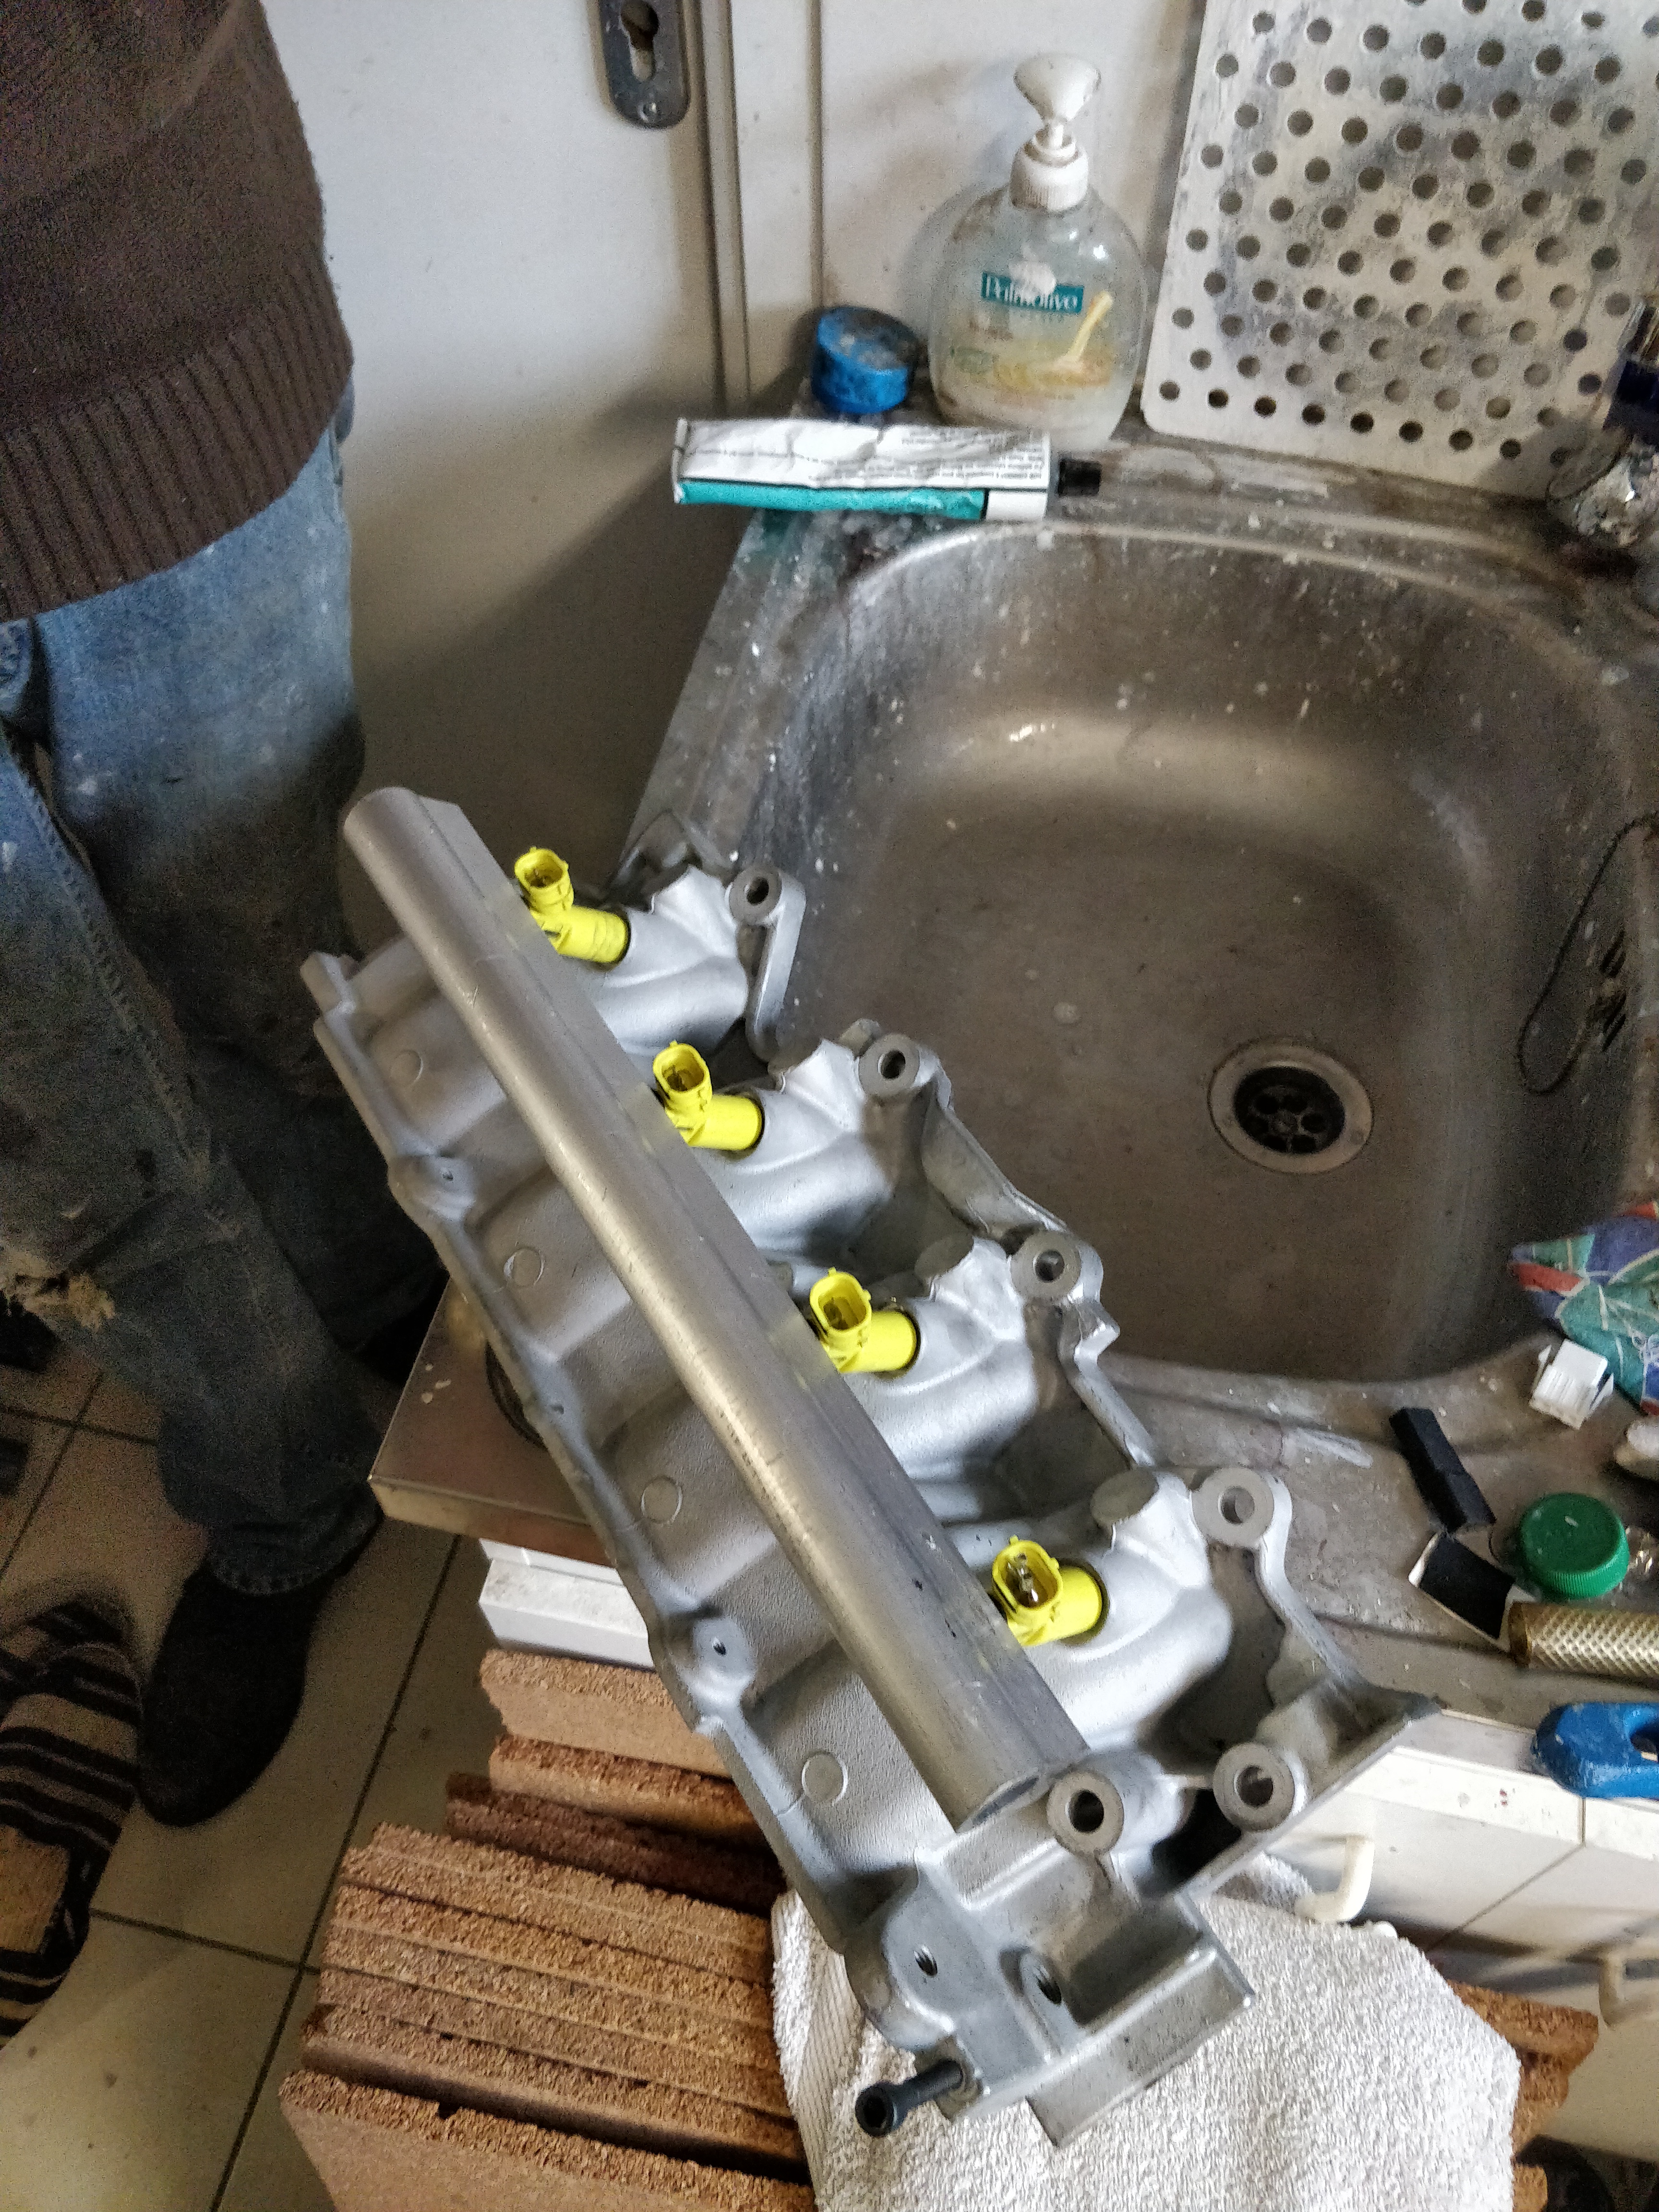 OEM lower manifold with temporary yellow RX8 injectors (420cc) and custom fuel rail